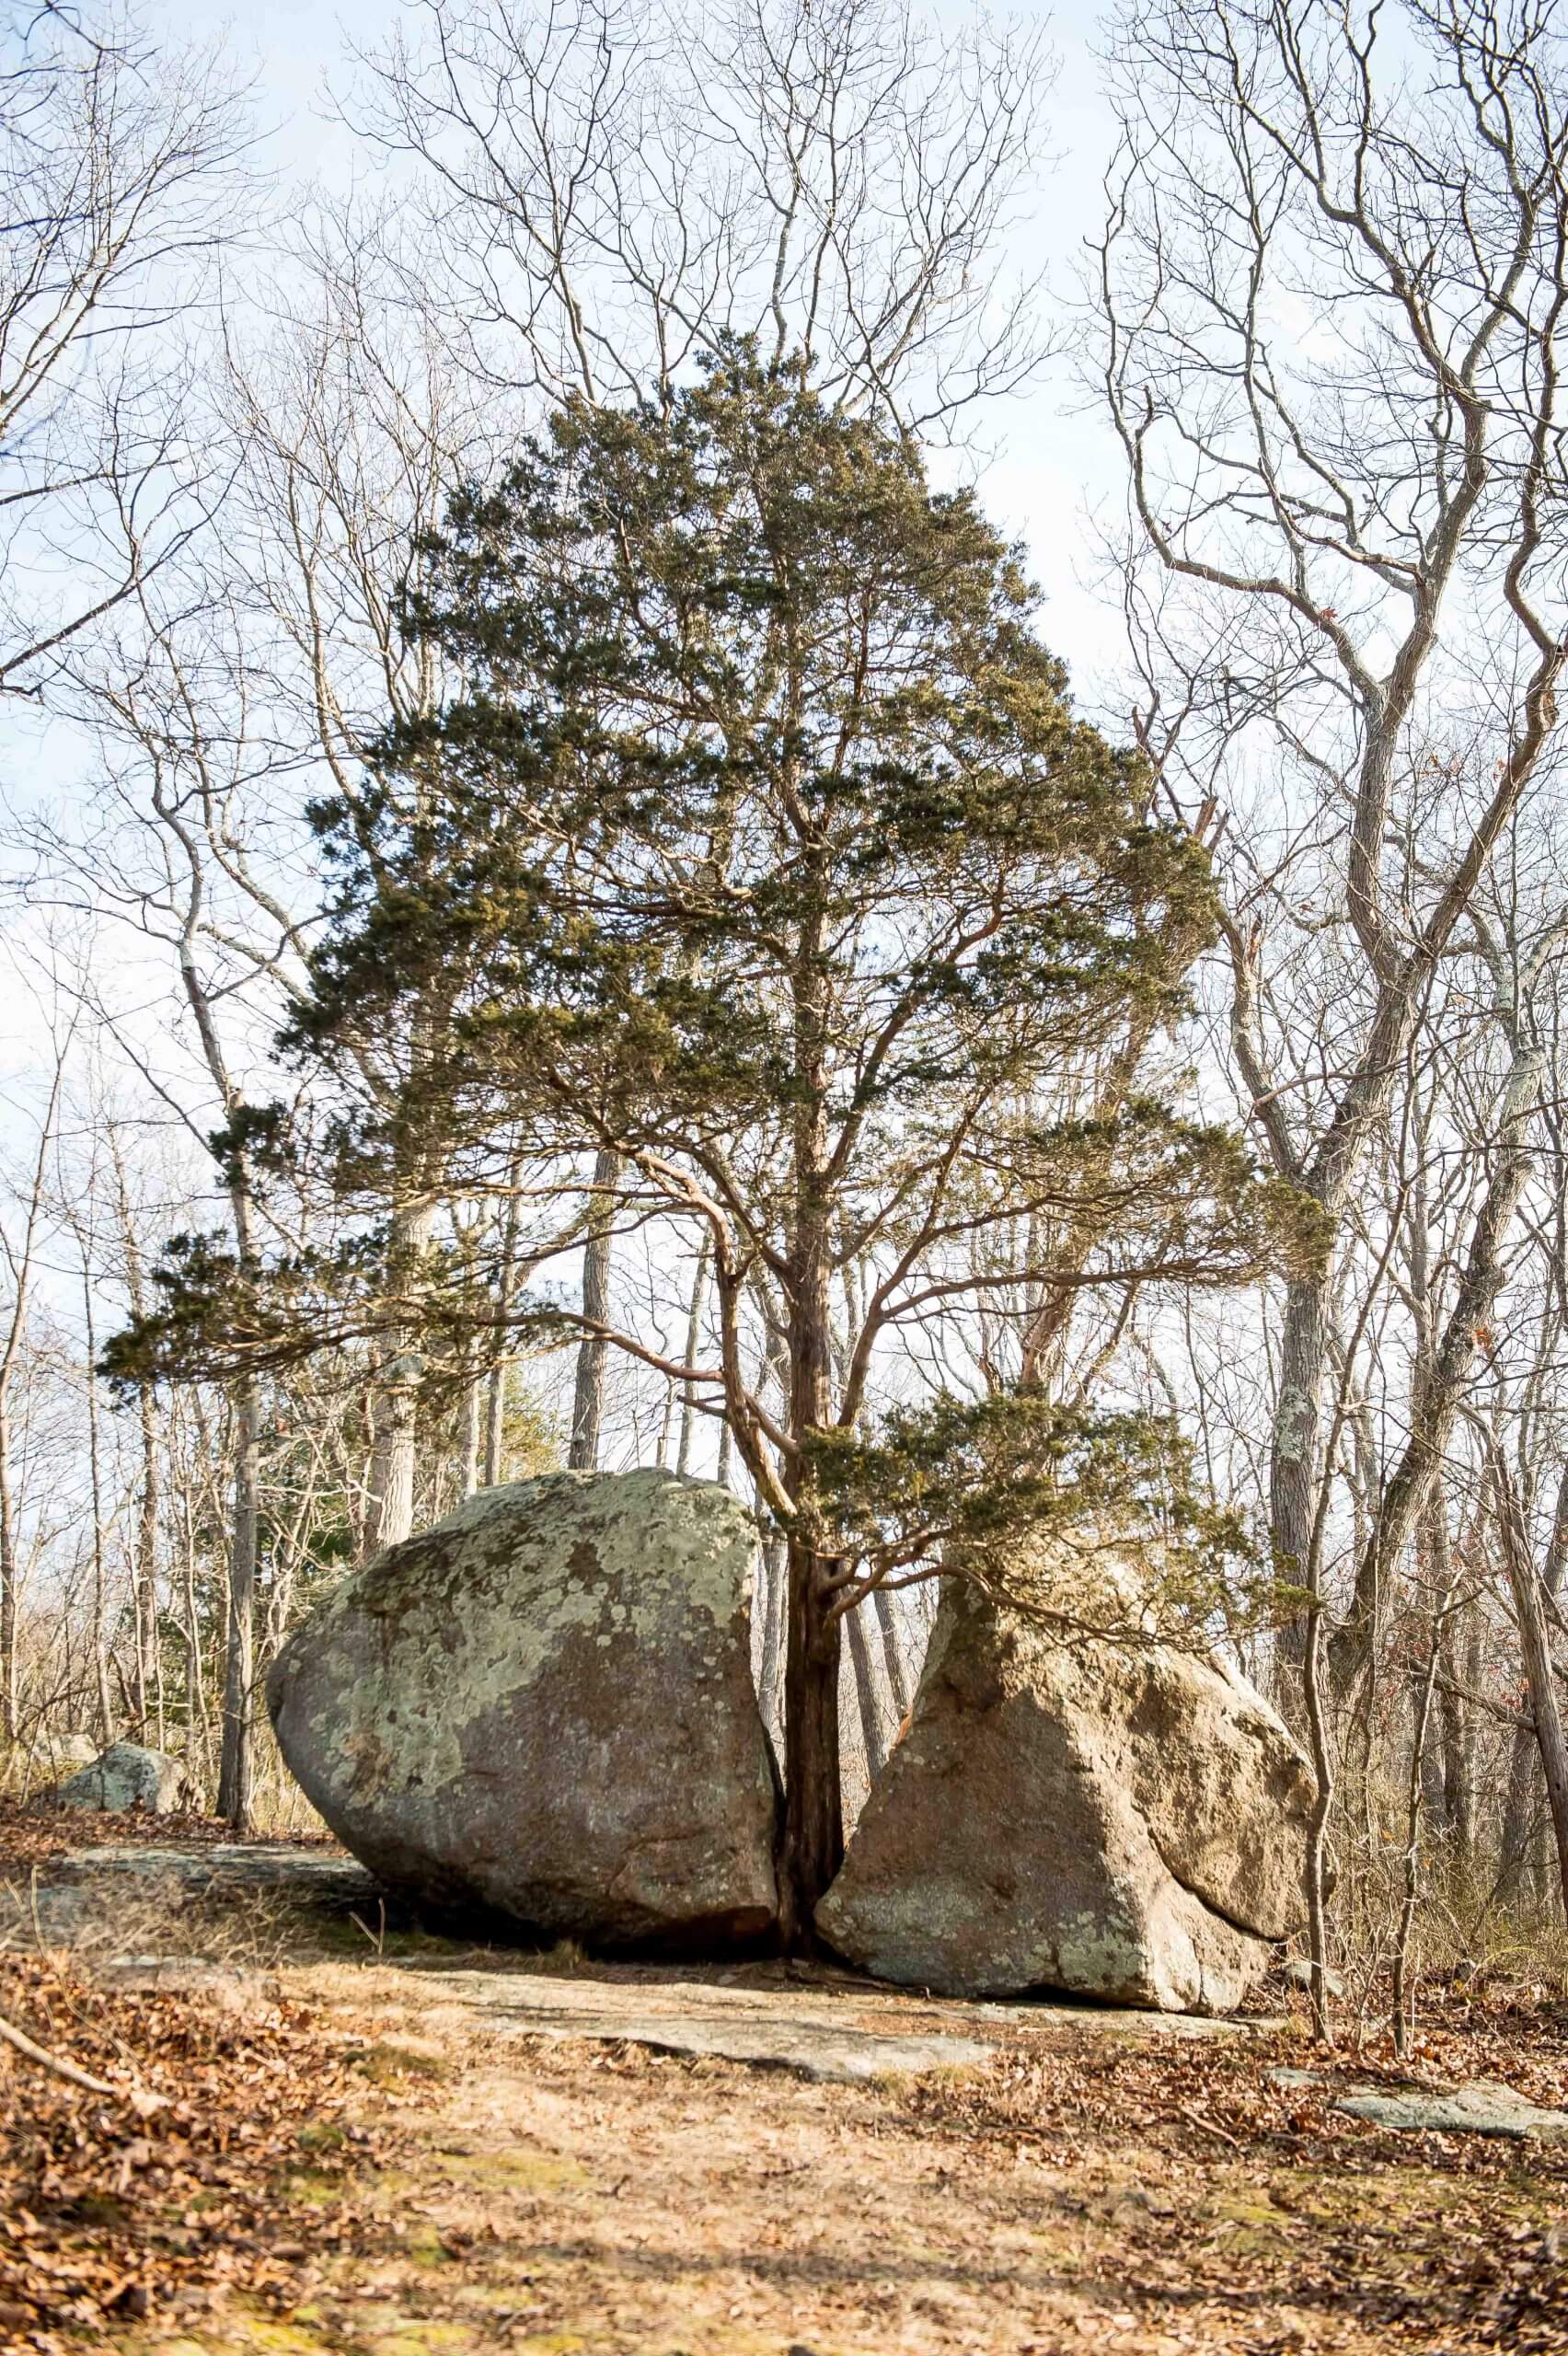 A tree in a park between two boulders.